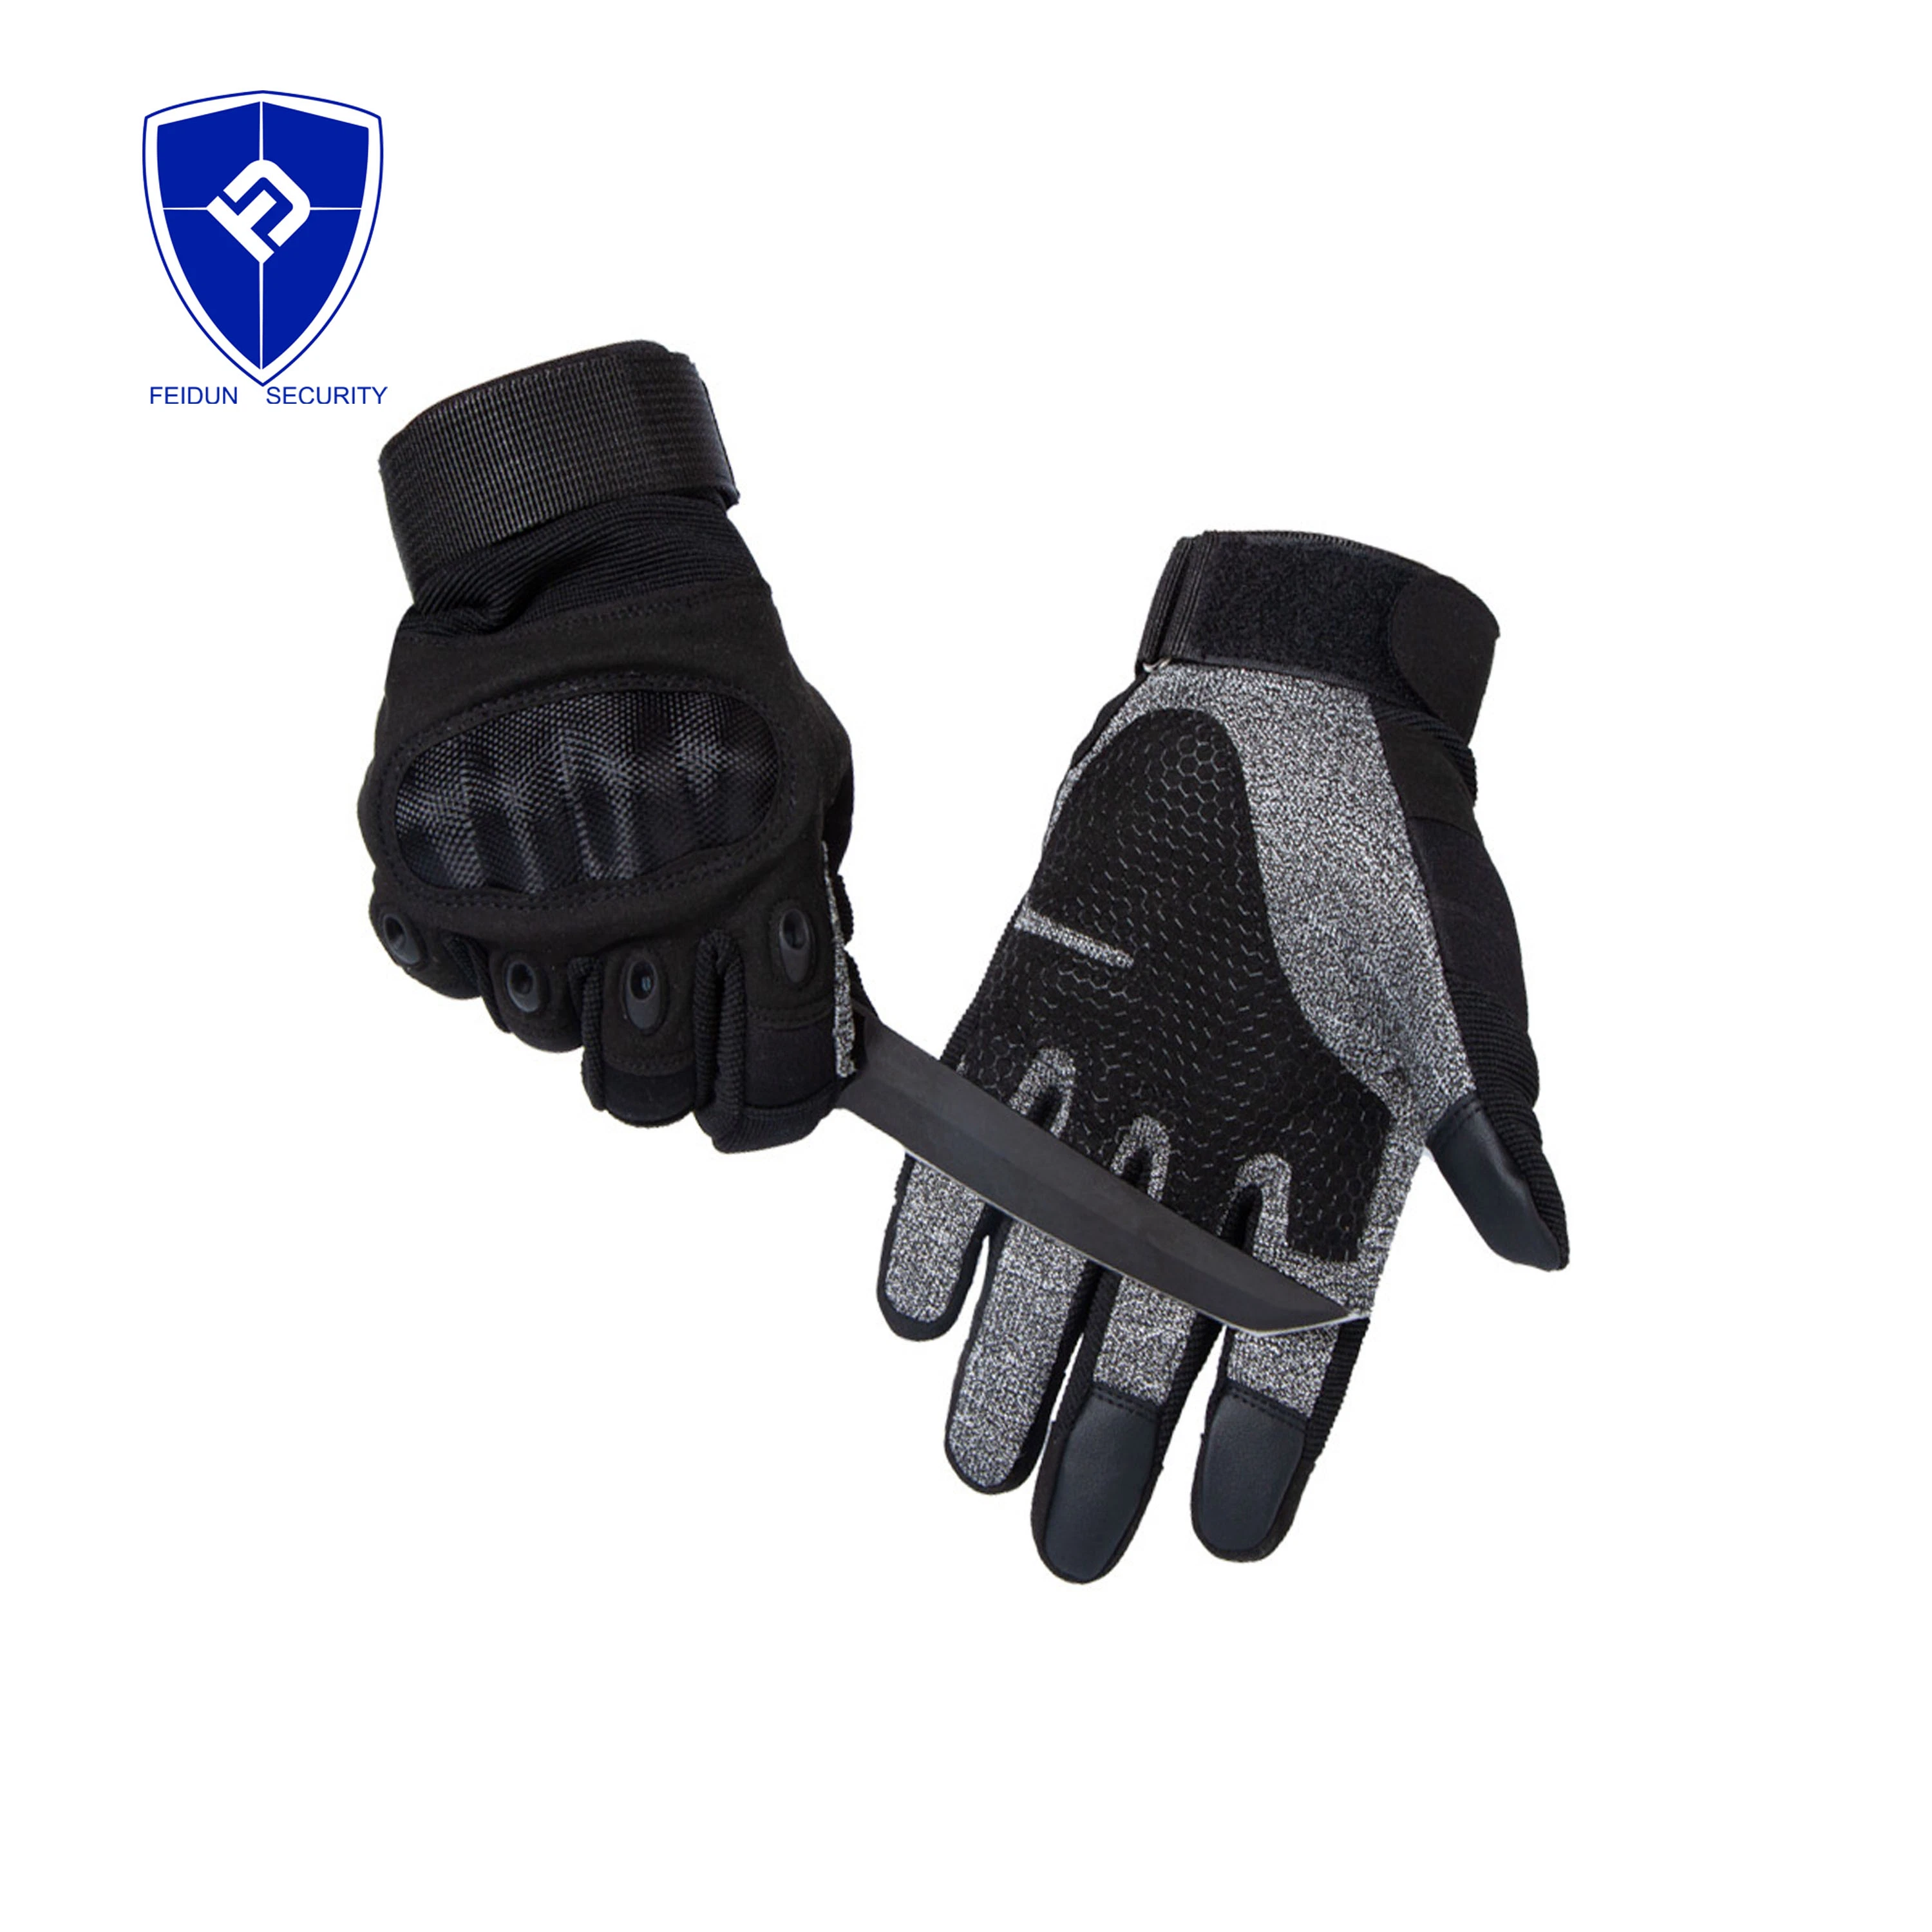 Industrial CE Level 5 Cut Resistant Knitted for Hand Protection Welding Gloves Safety Working Gloves